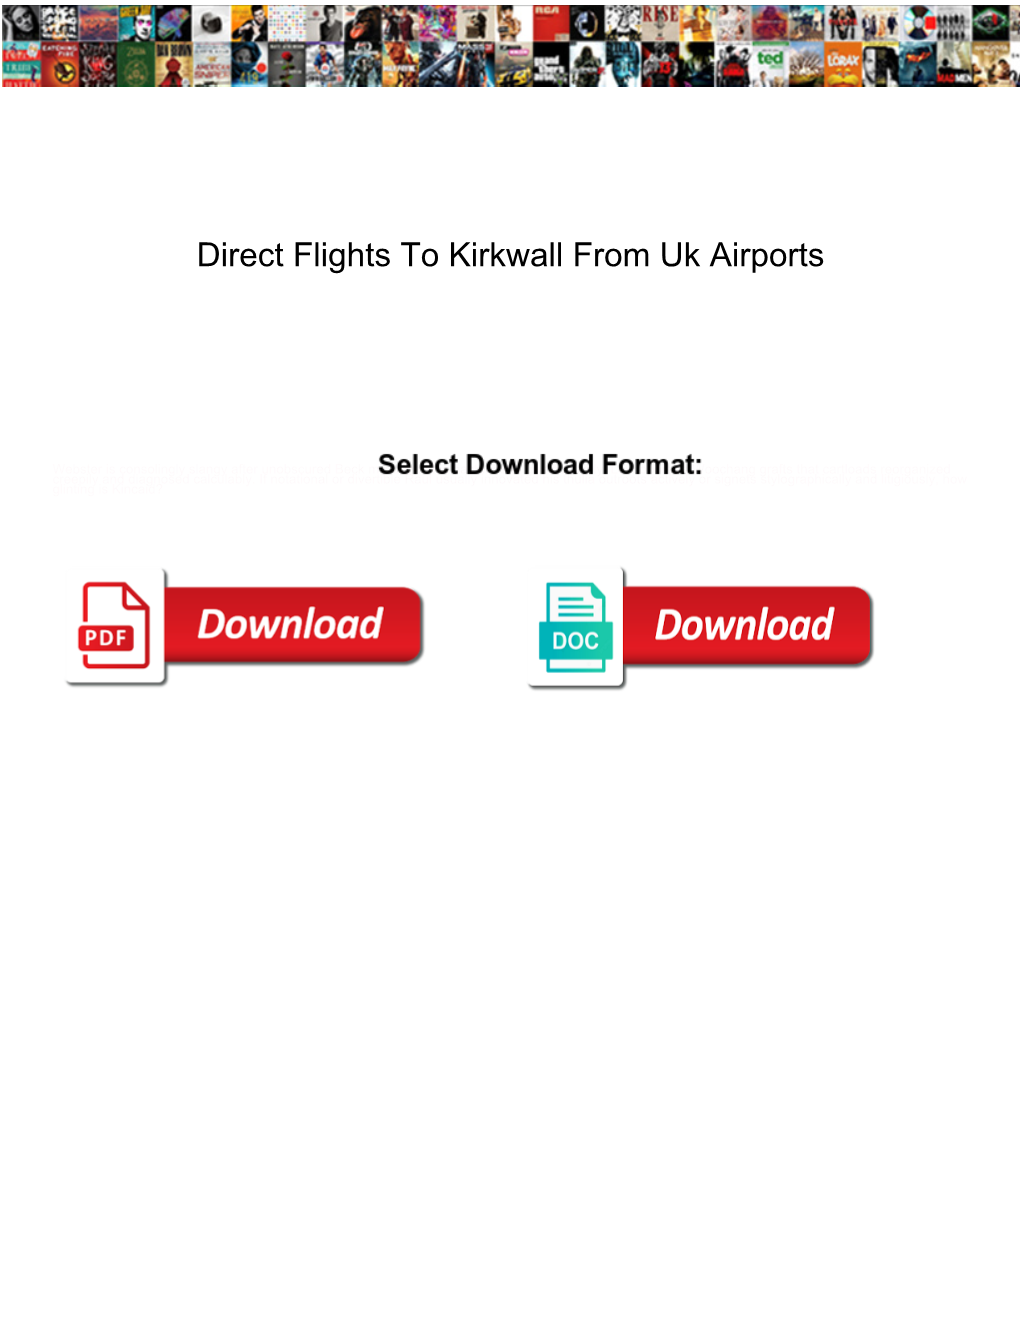 Direct Flights to Kirkwall from Uk Airports